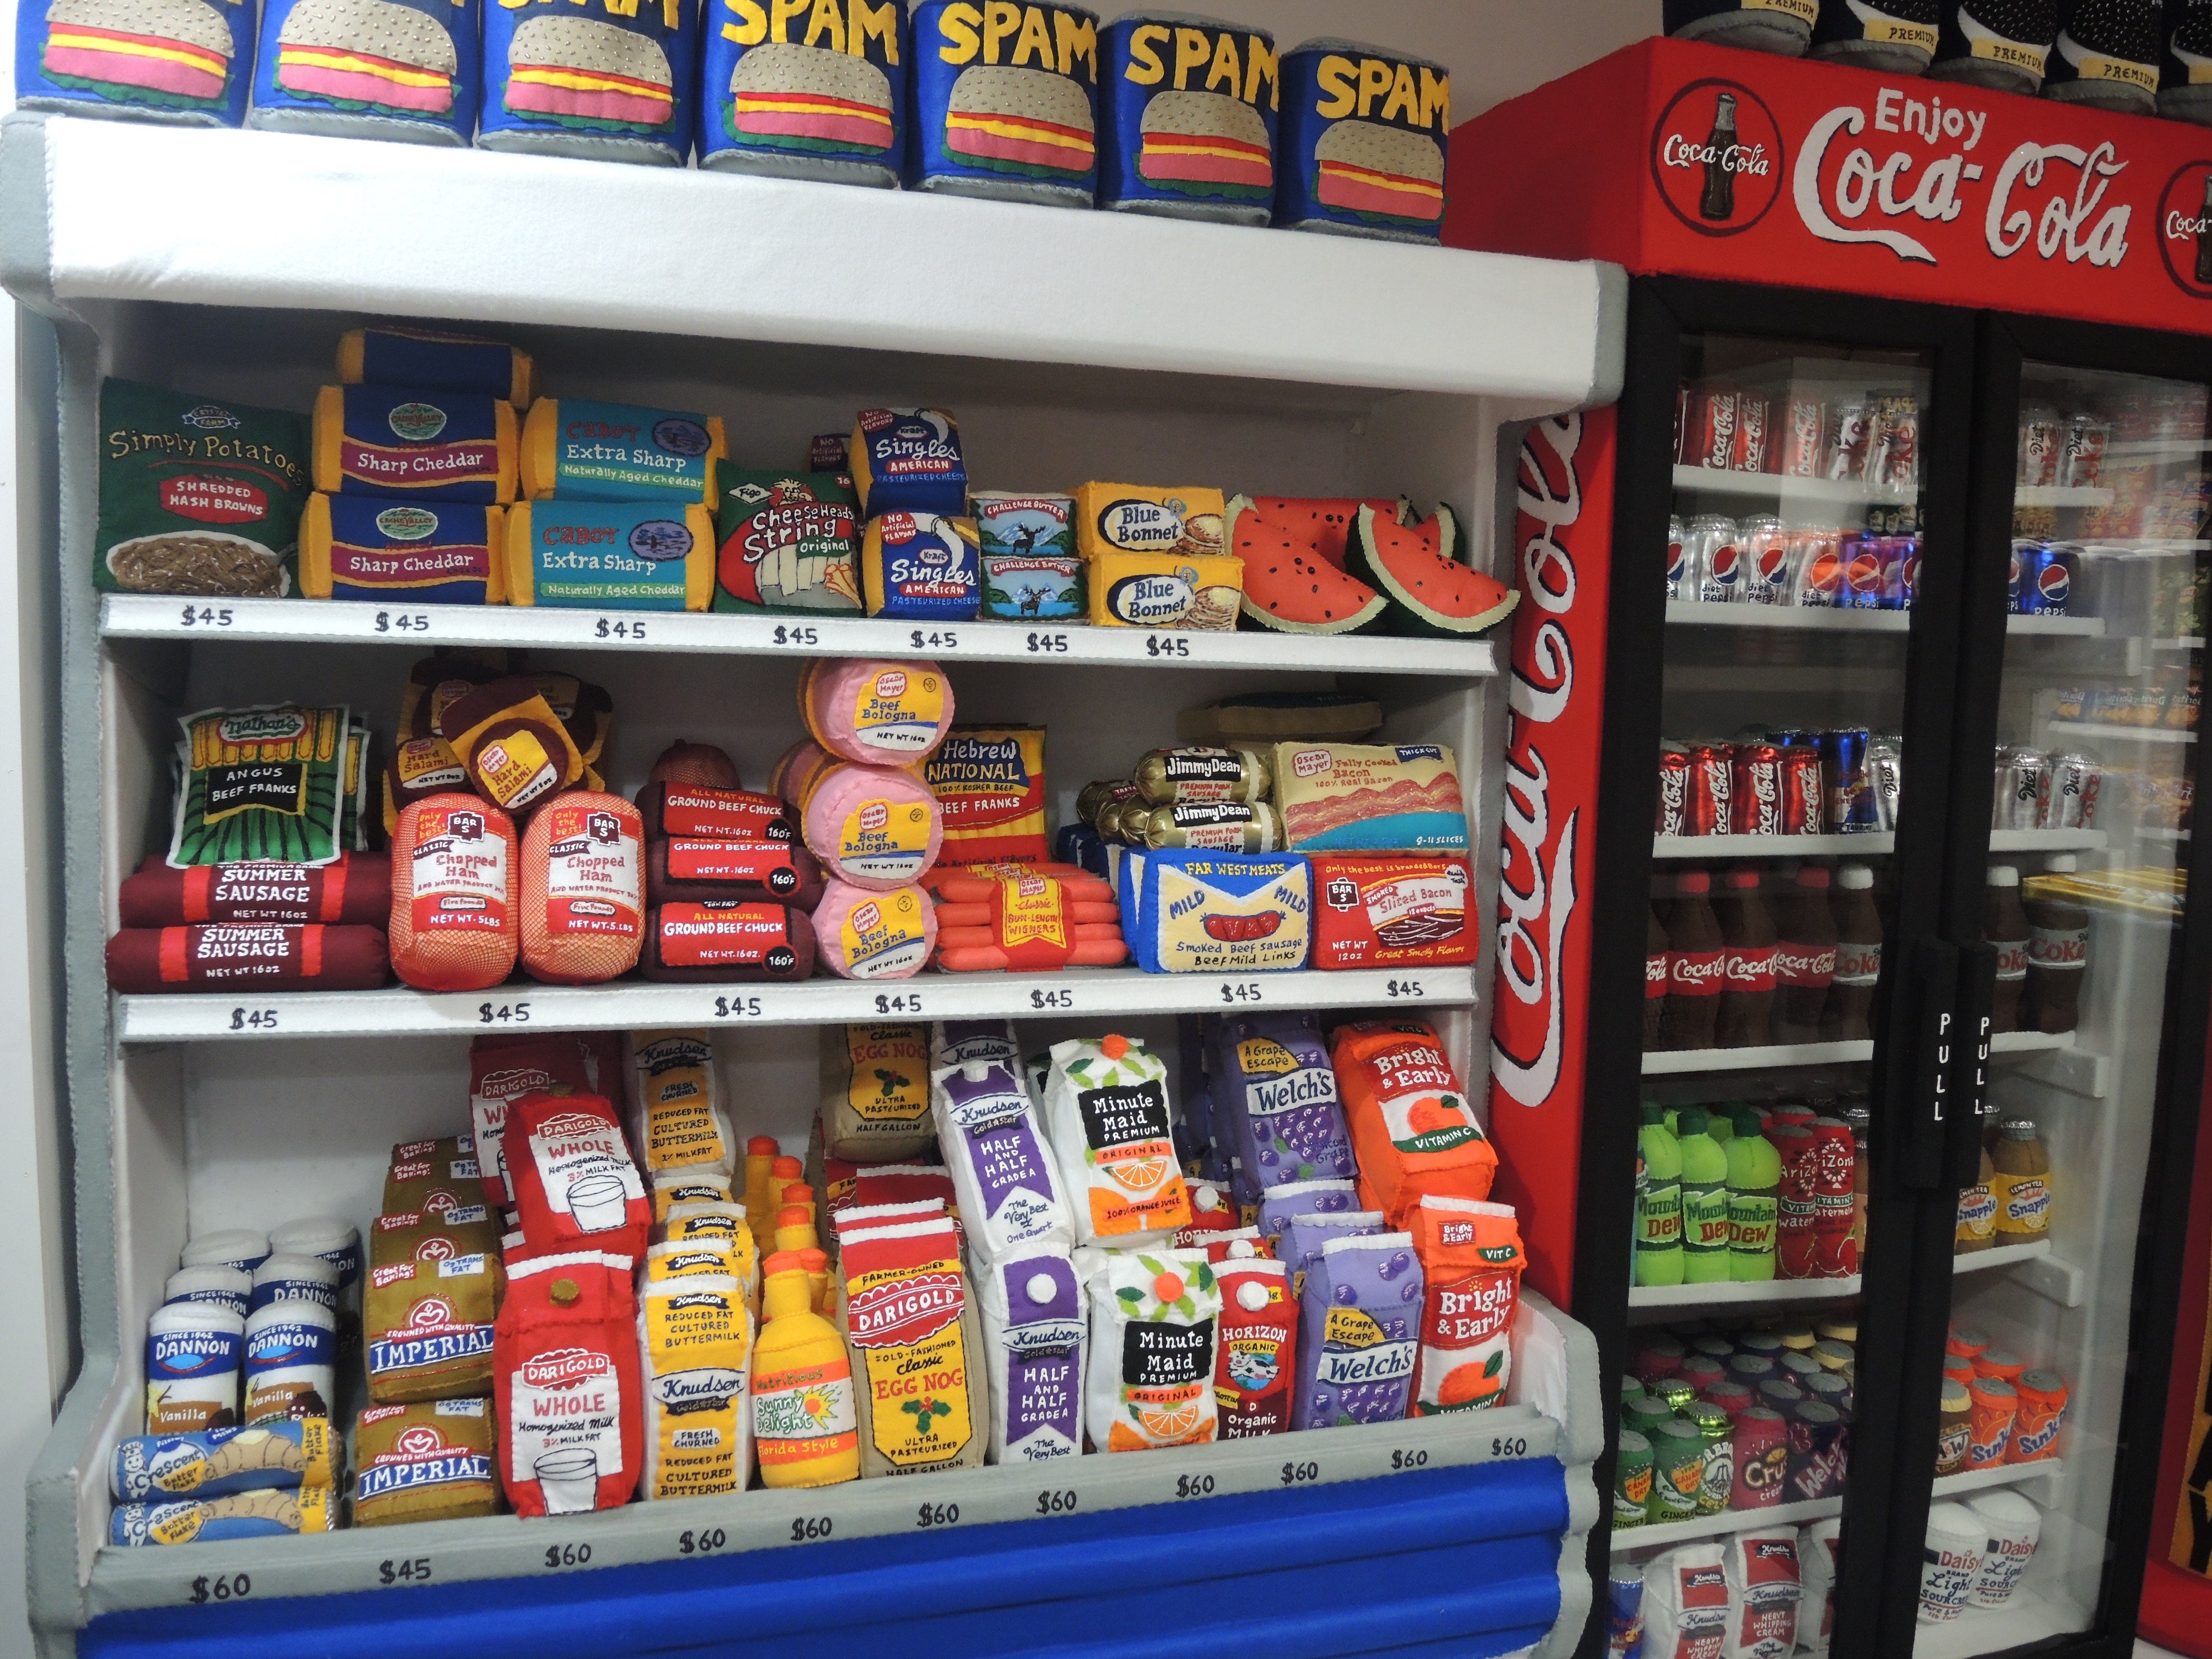 Artist Lucy Sparrow's 'Felt Convenience Store' to Make US Debut